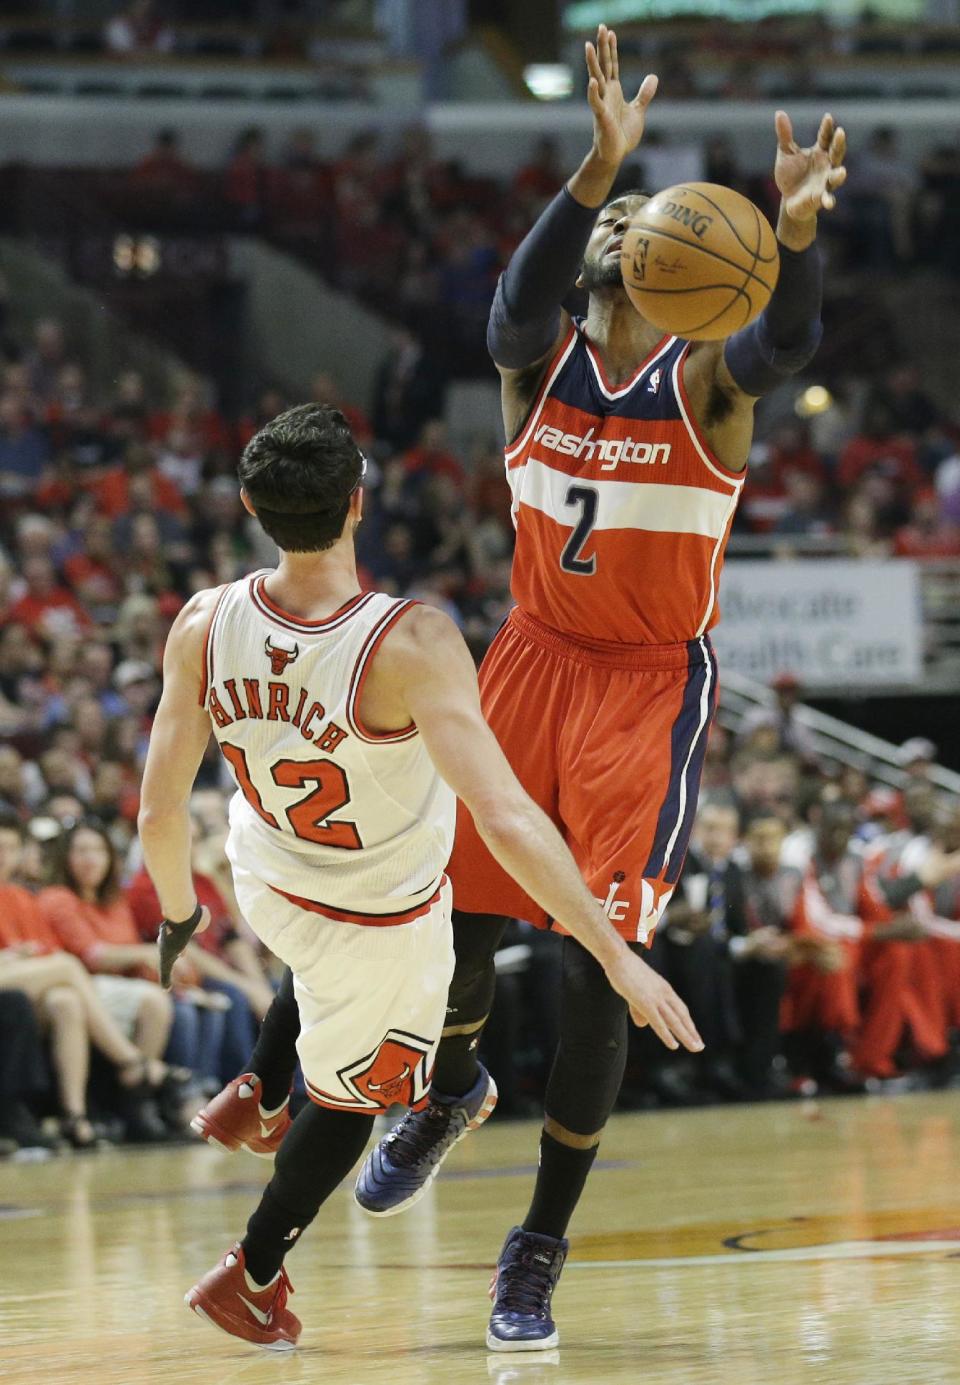 Chicago Bulls guard Kirk Hinrich (12) fouls Washington Wizards guard John Wall (2) during the first half in Game 1 of an opening-round NBA basketball playoff series in Chicago, Sunday, April 20, 2014. (AP Photo/Nam Y. Huh)